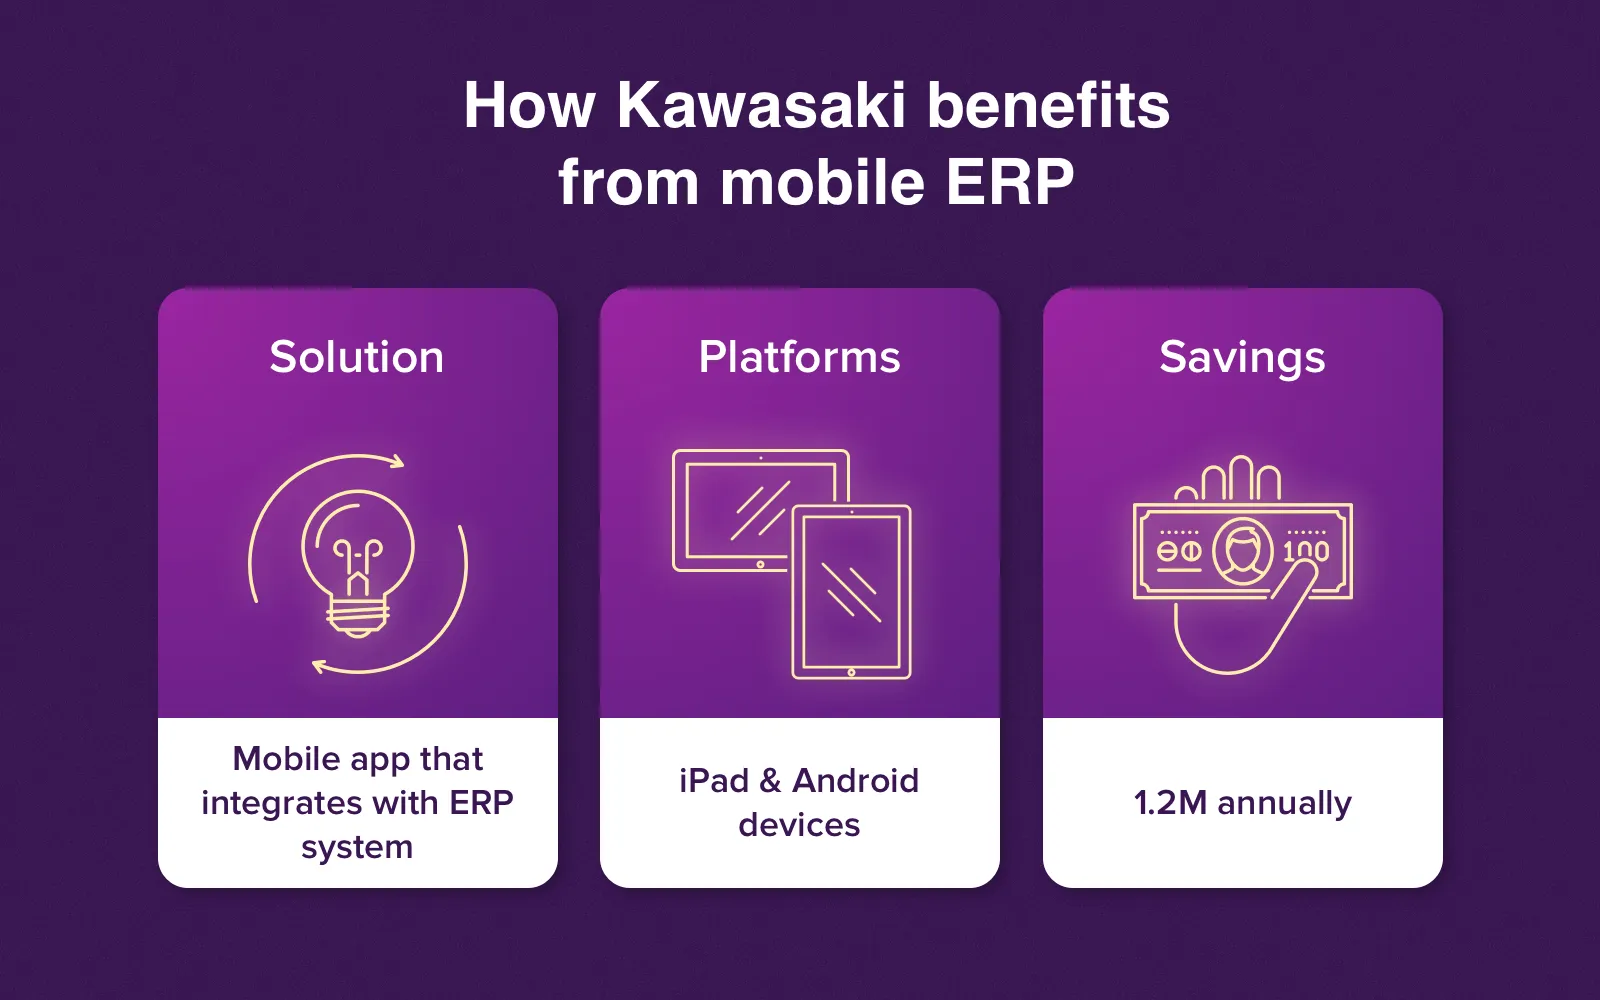 Results of Kawasaki's mobile ERP strategy